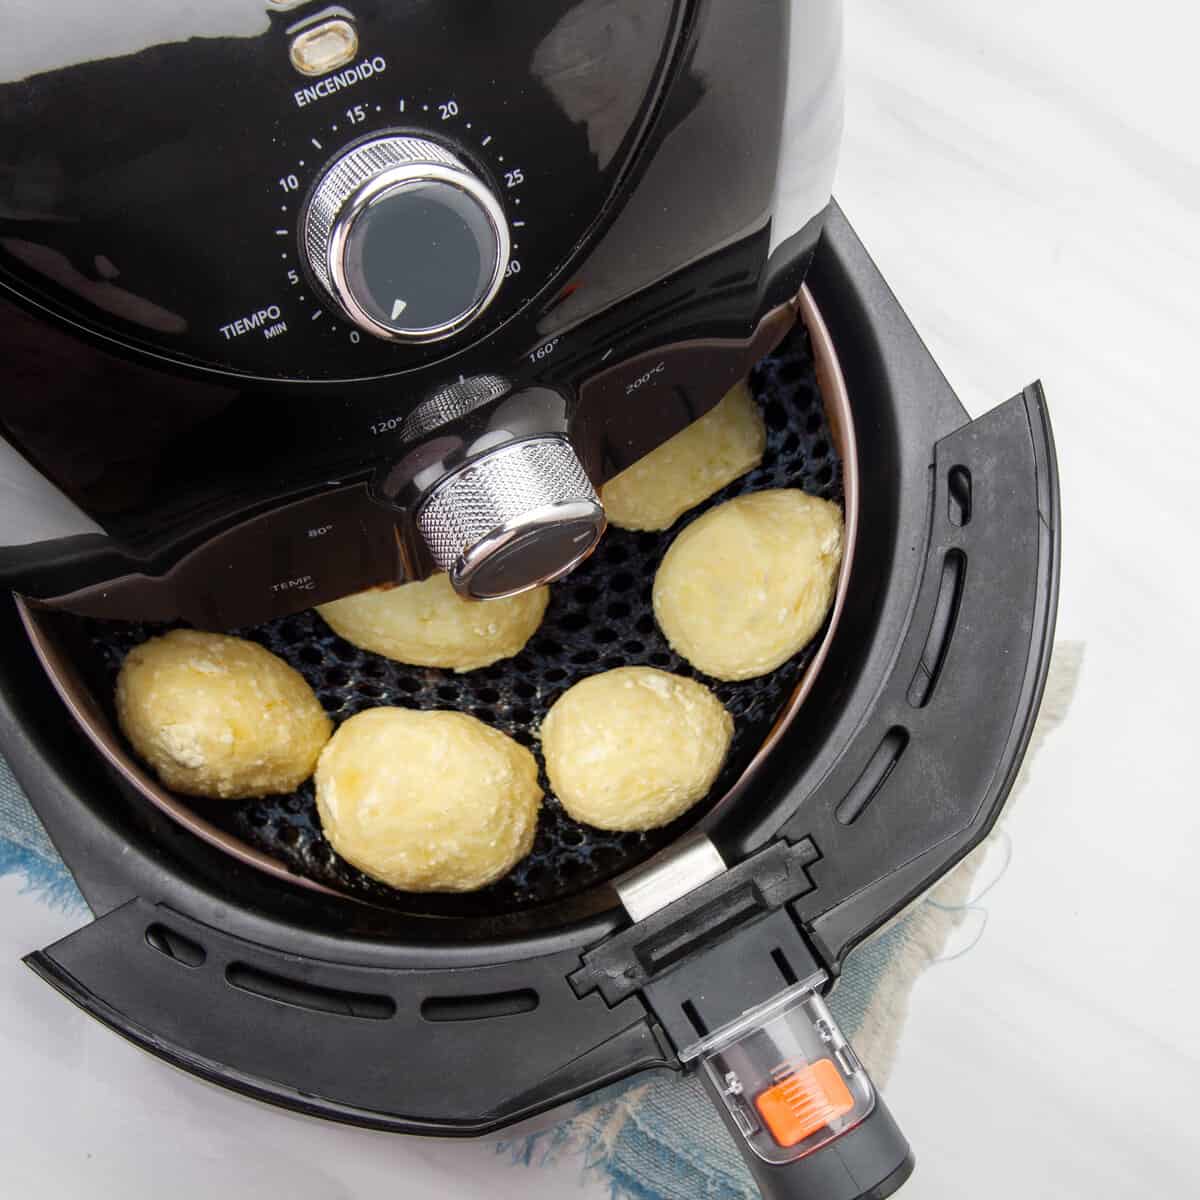 Cook the fritters in the air fryer